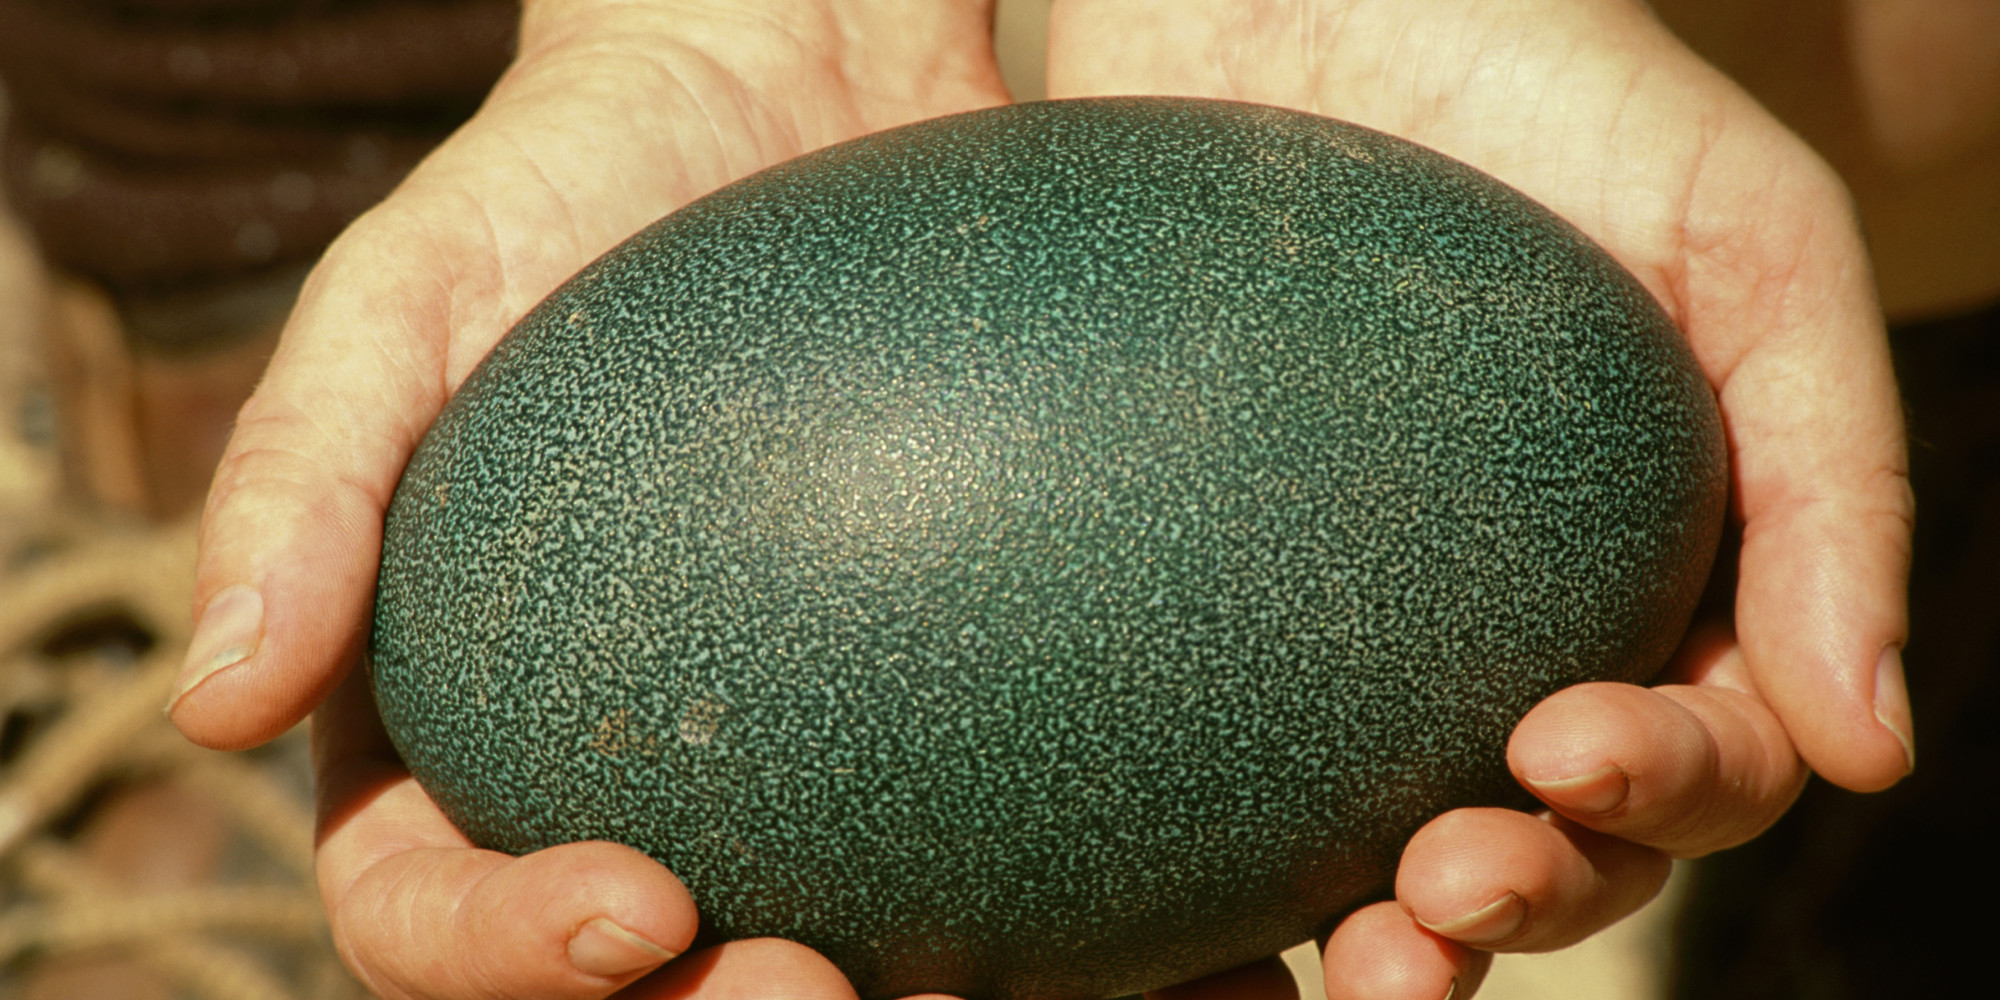 emu eggs ostrich emus egg different between bird australia biggest huffpost largest difference might crazy thing looking